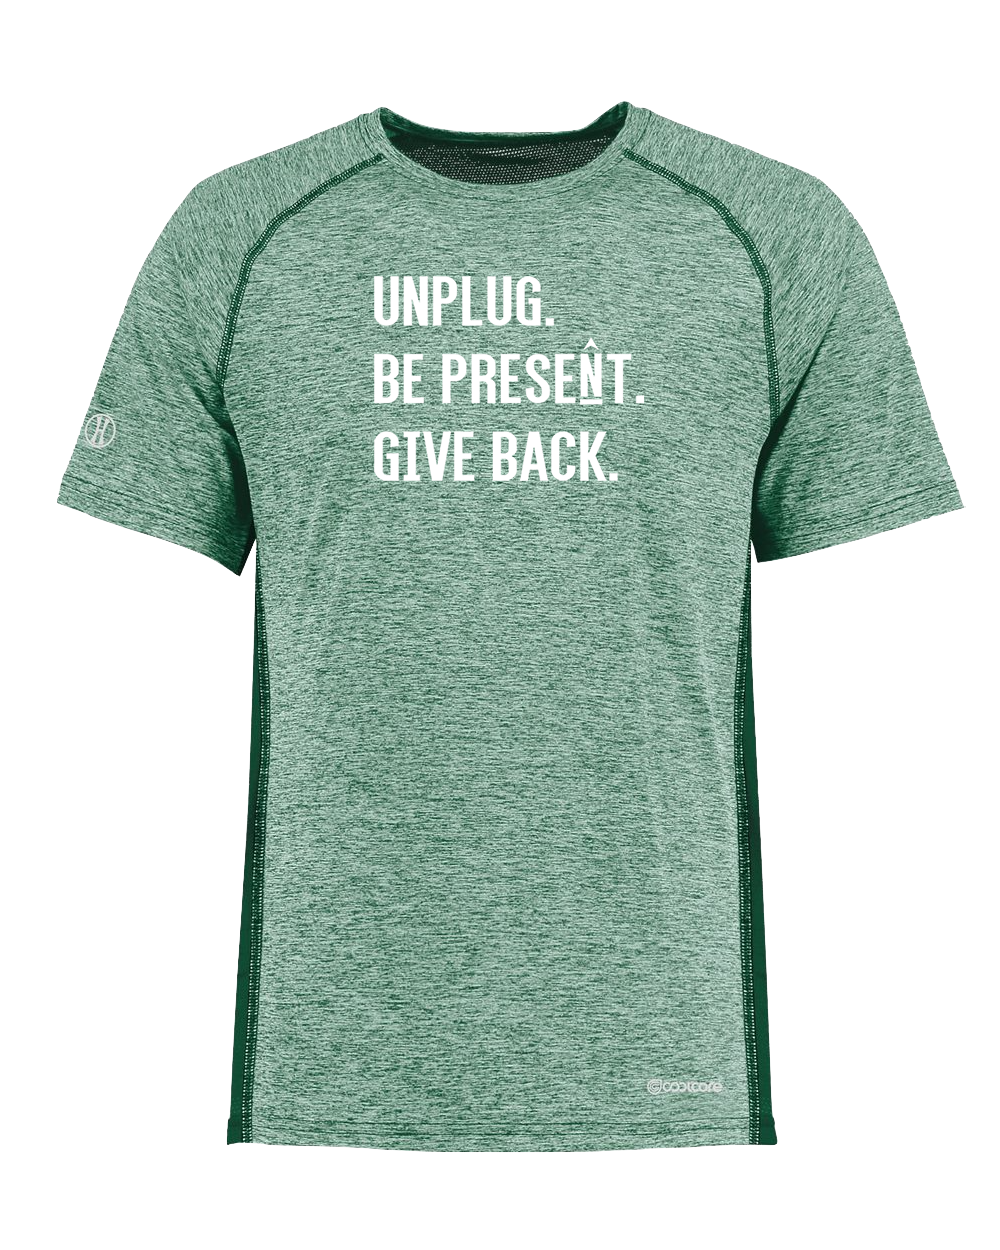 UNPLUG. BE PRESENT. GIVE BACK. Poly/Elastane High Performance T-Shirt with UPF 50+